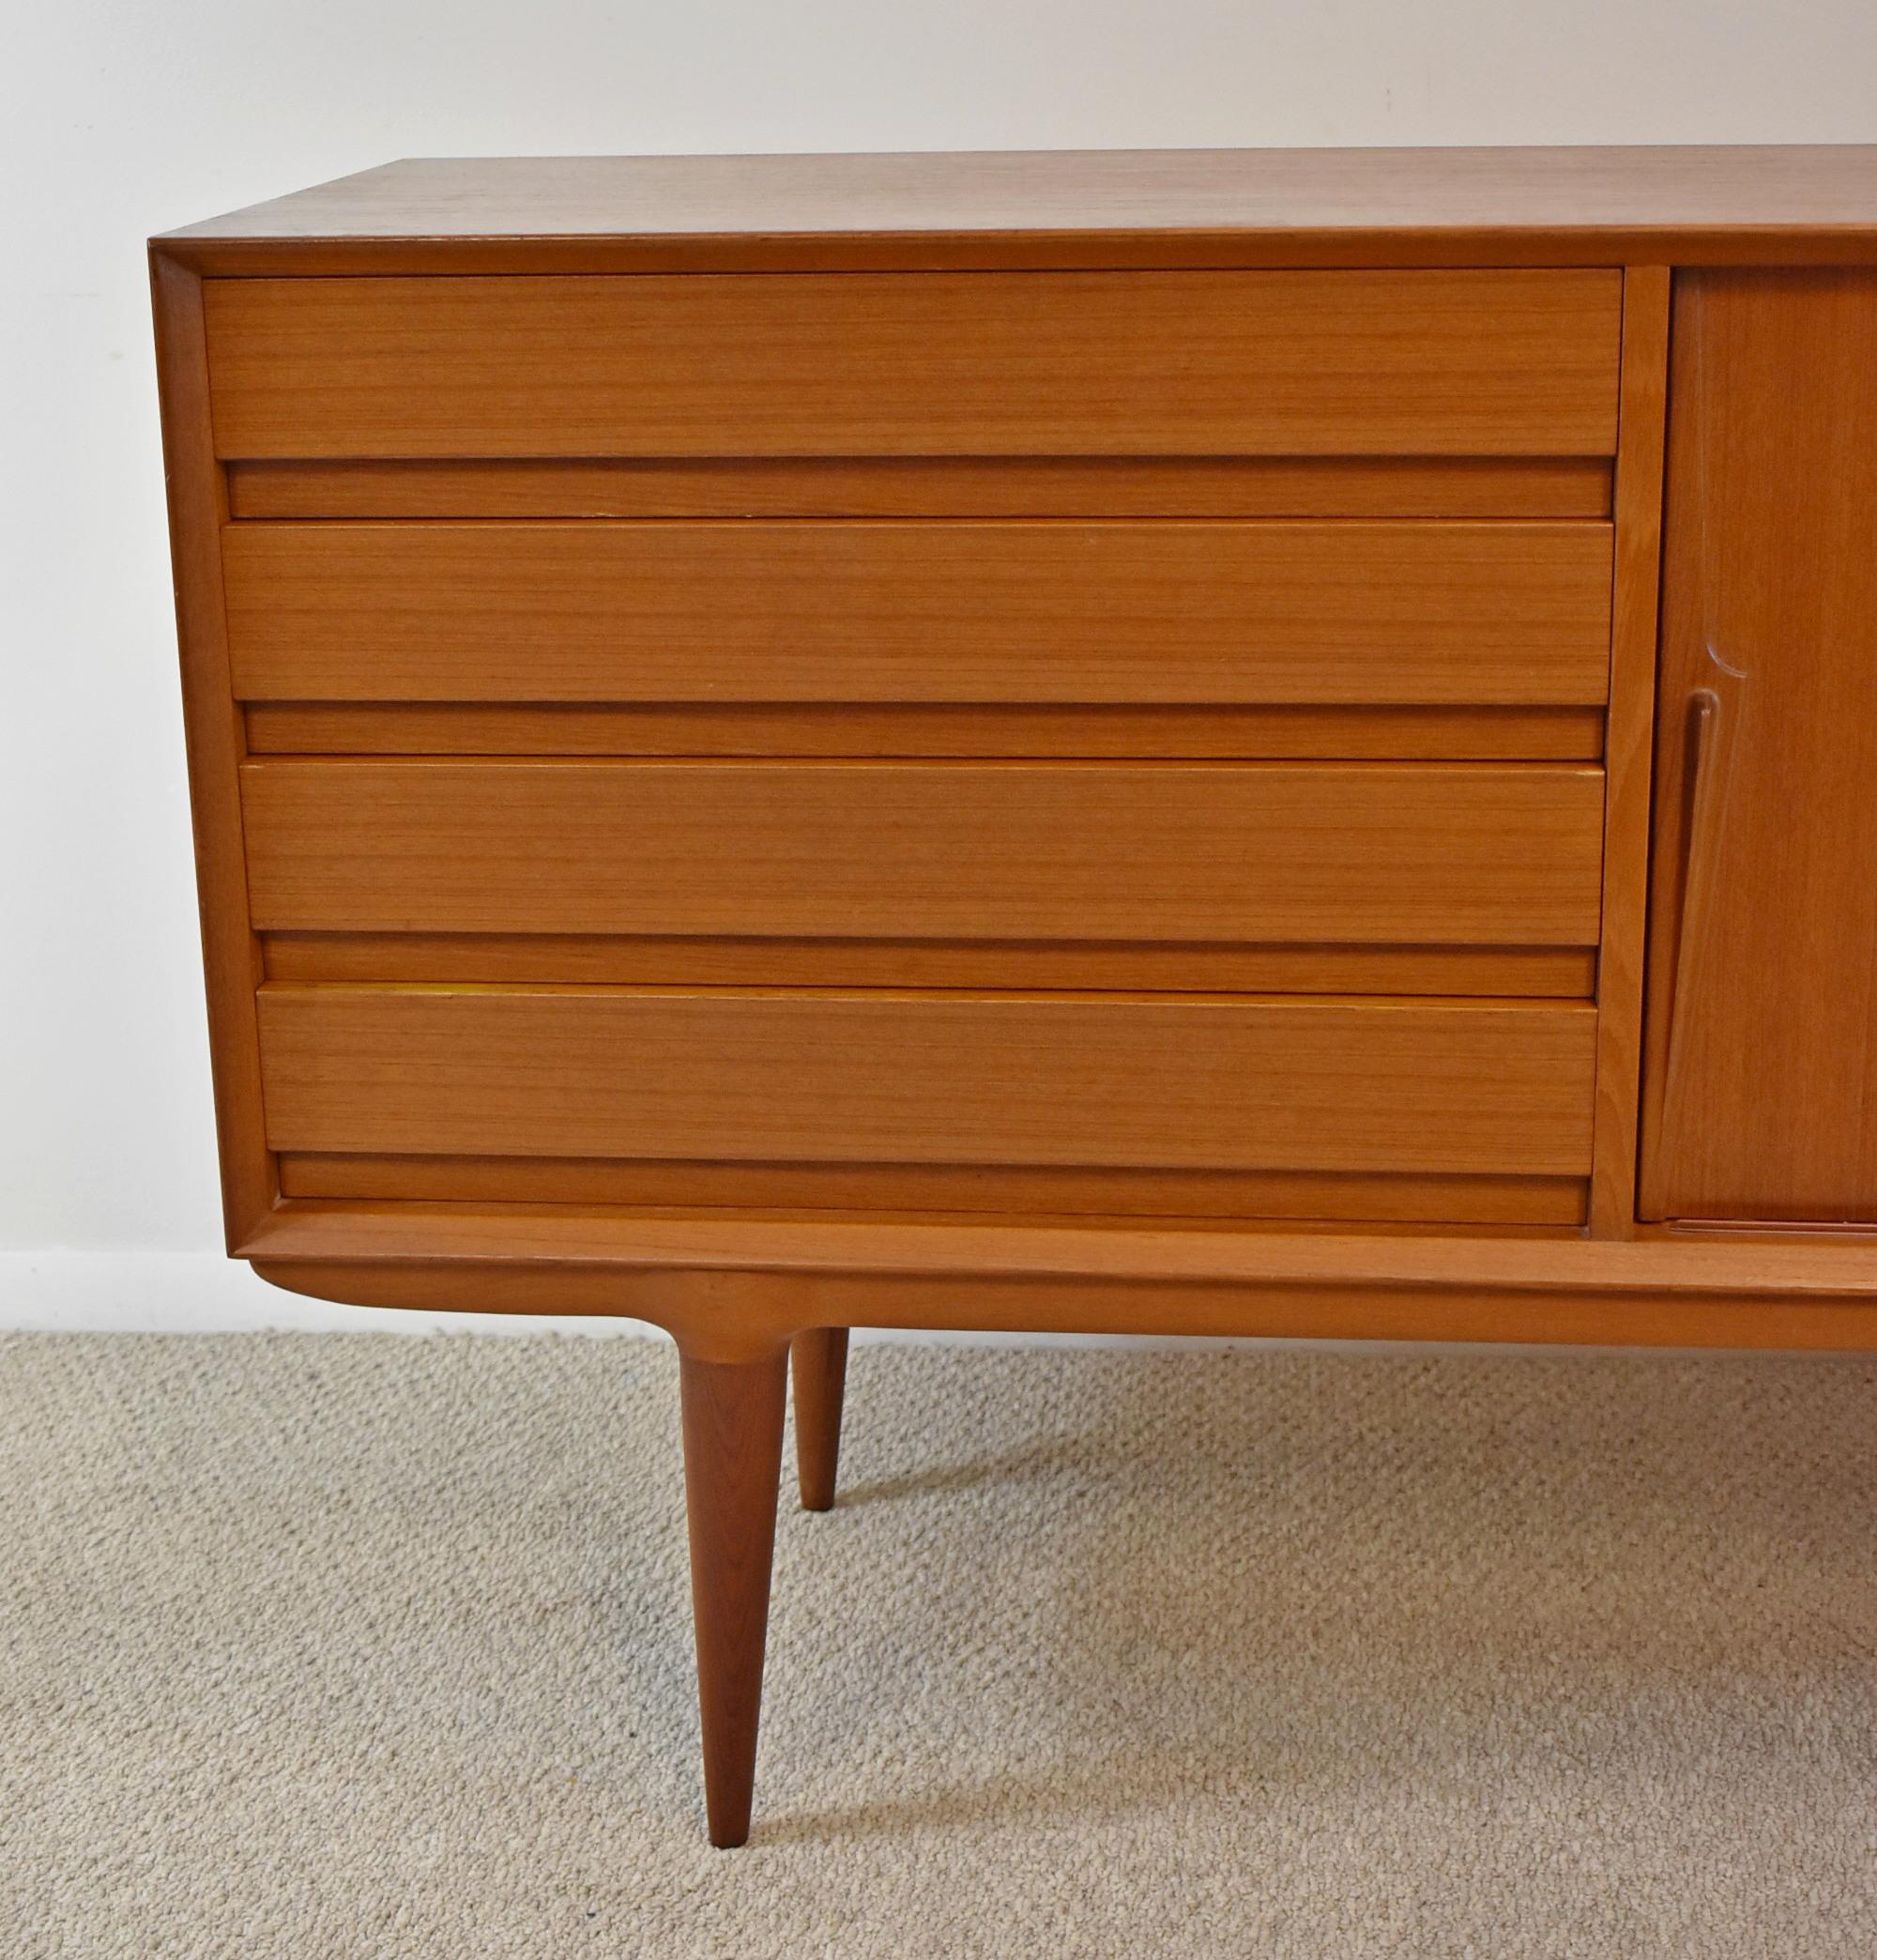 Teak Credenza. Circa 1958. Four drawers and two sliding doors. Model NR18 by Omann Jun Mobelfabrik (Danish, established 1933). Felted tray within one drawer. Good Vintage condition, disconnected from base/feet, some light surface wear consistent